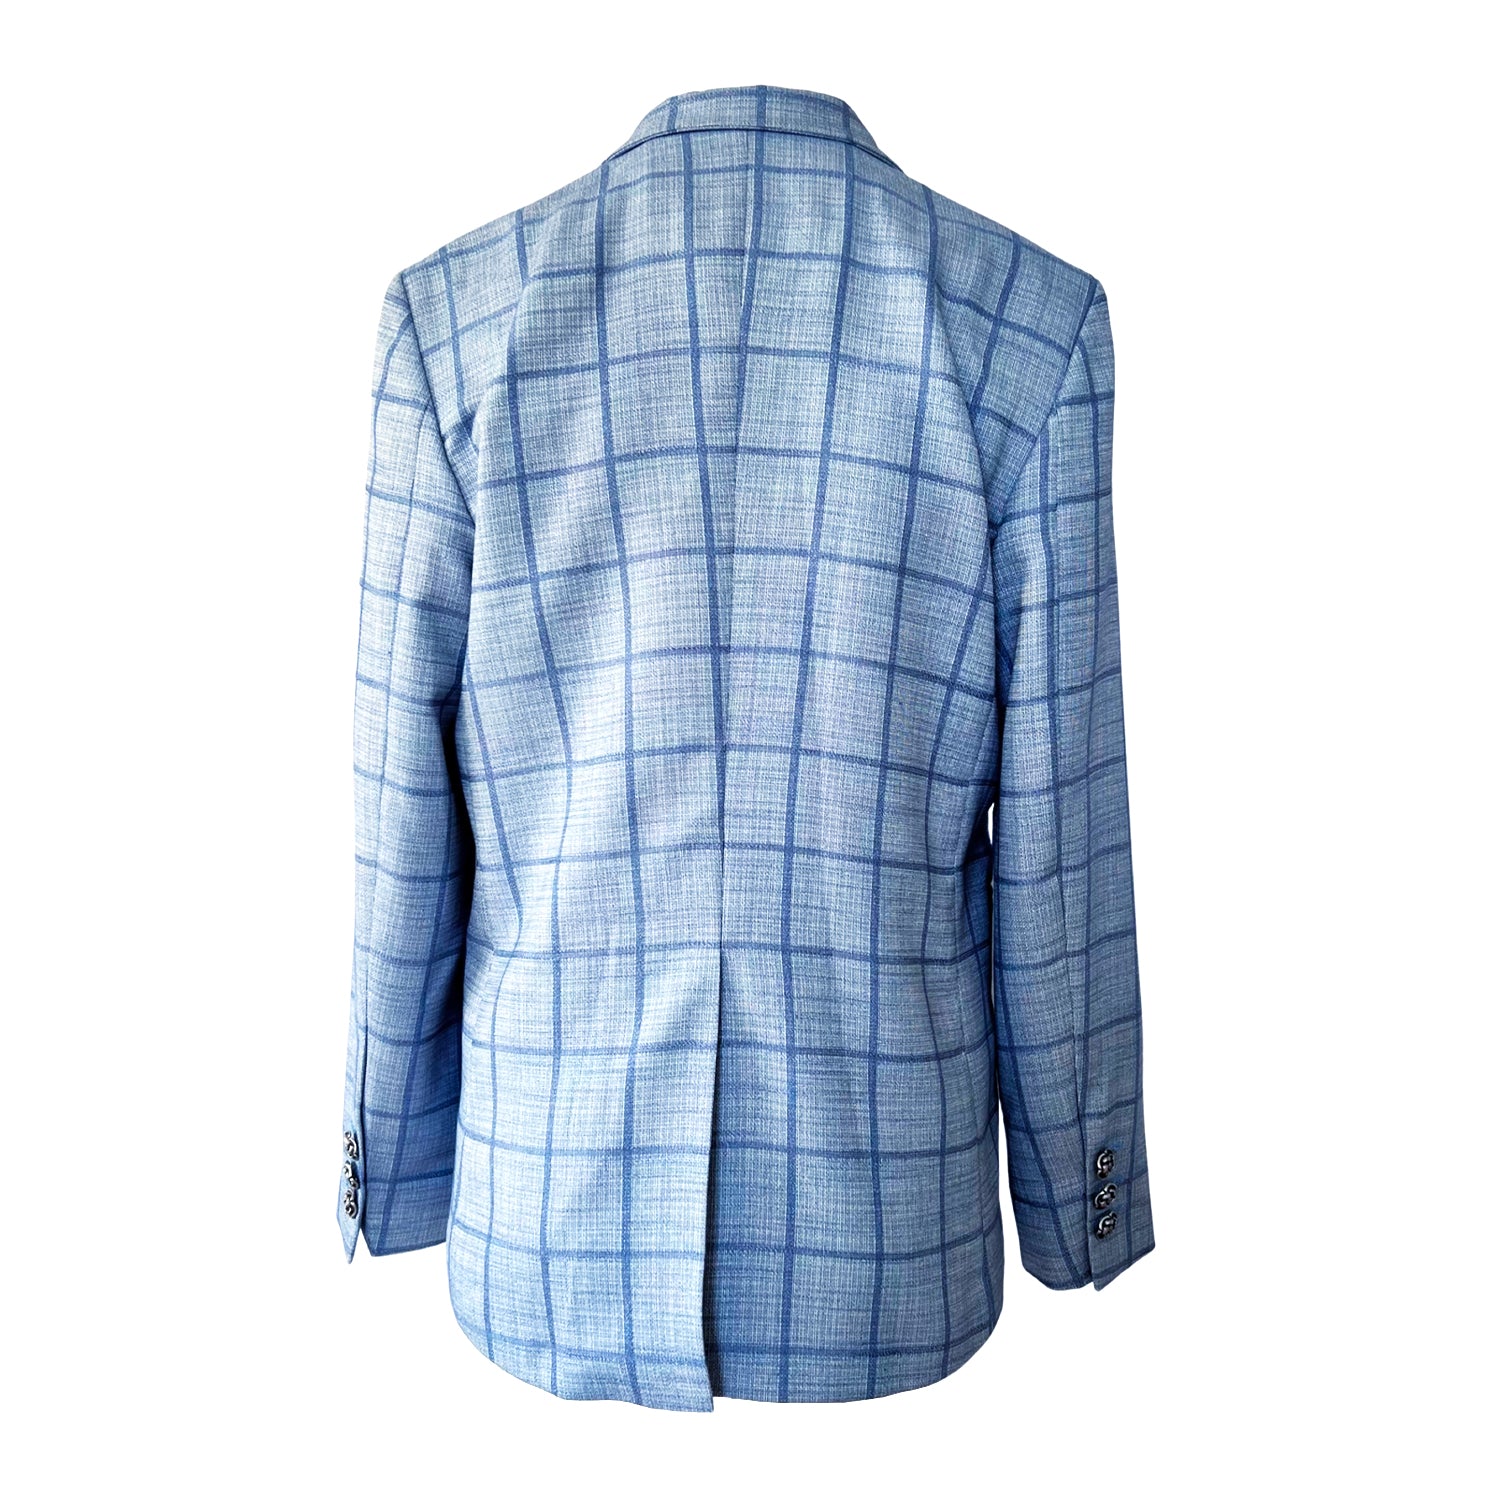 Double-Breasted Blazer in Light Blue Plaid